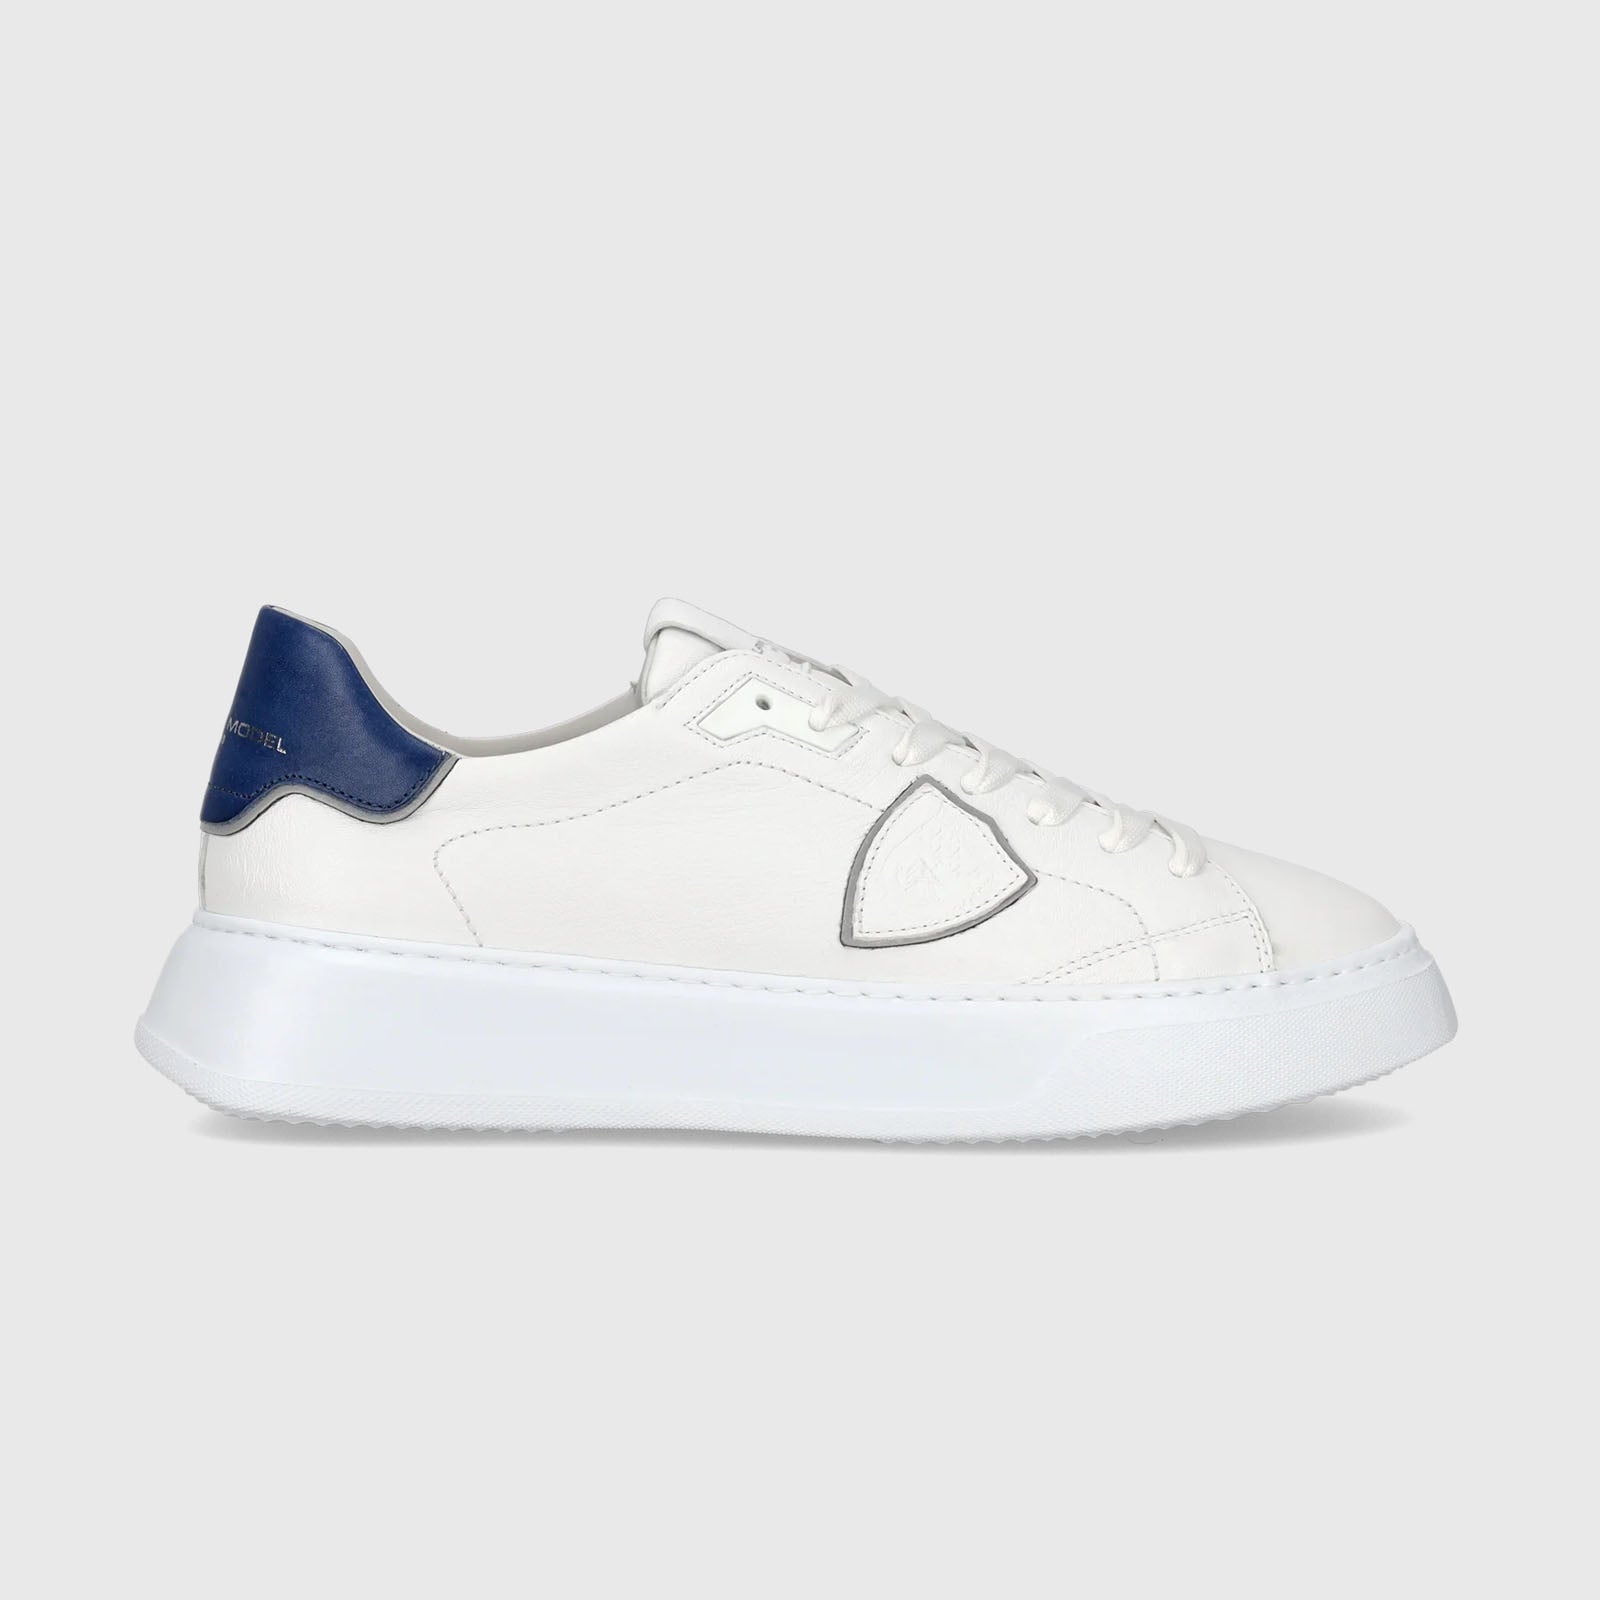 Philippe Model Sneaker Temple West Leather White/Blue - 7